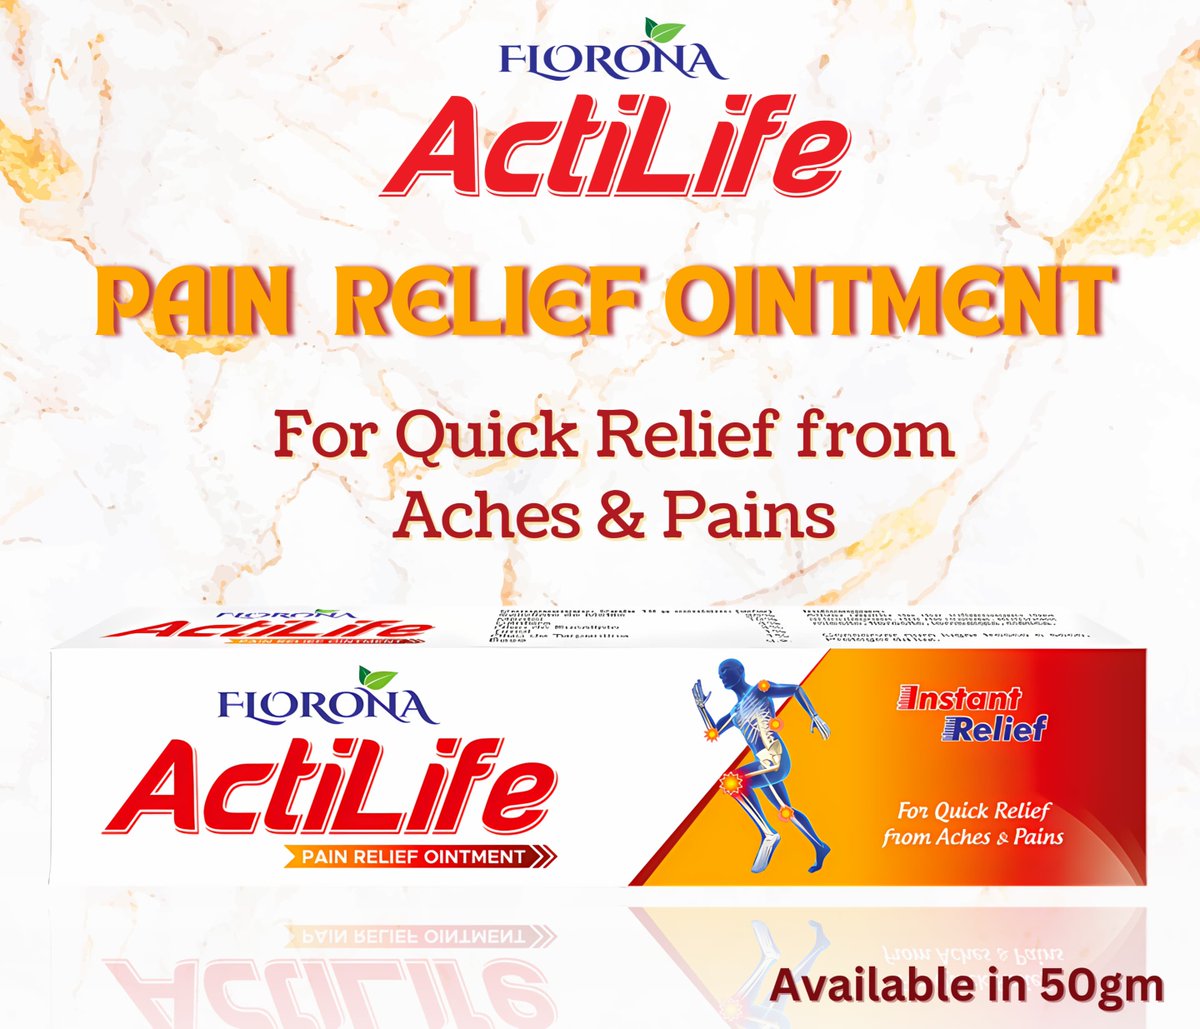 Experience instant relief from aches and pains with Florona ActiLife Pain Relief Ointment. 
Available in 50gm

#onestlimited #onest #onestbrands #branding #painreliefointment #painrelief #ointment #reliefointment #instantrelief #florona #floronaactilife #actilife #fmcg #exporter